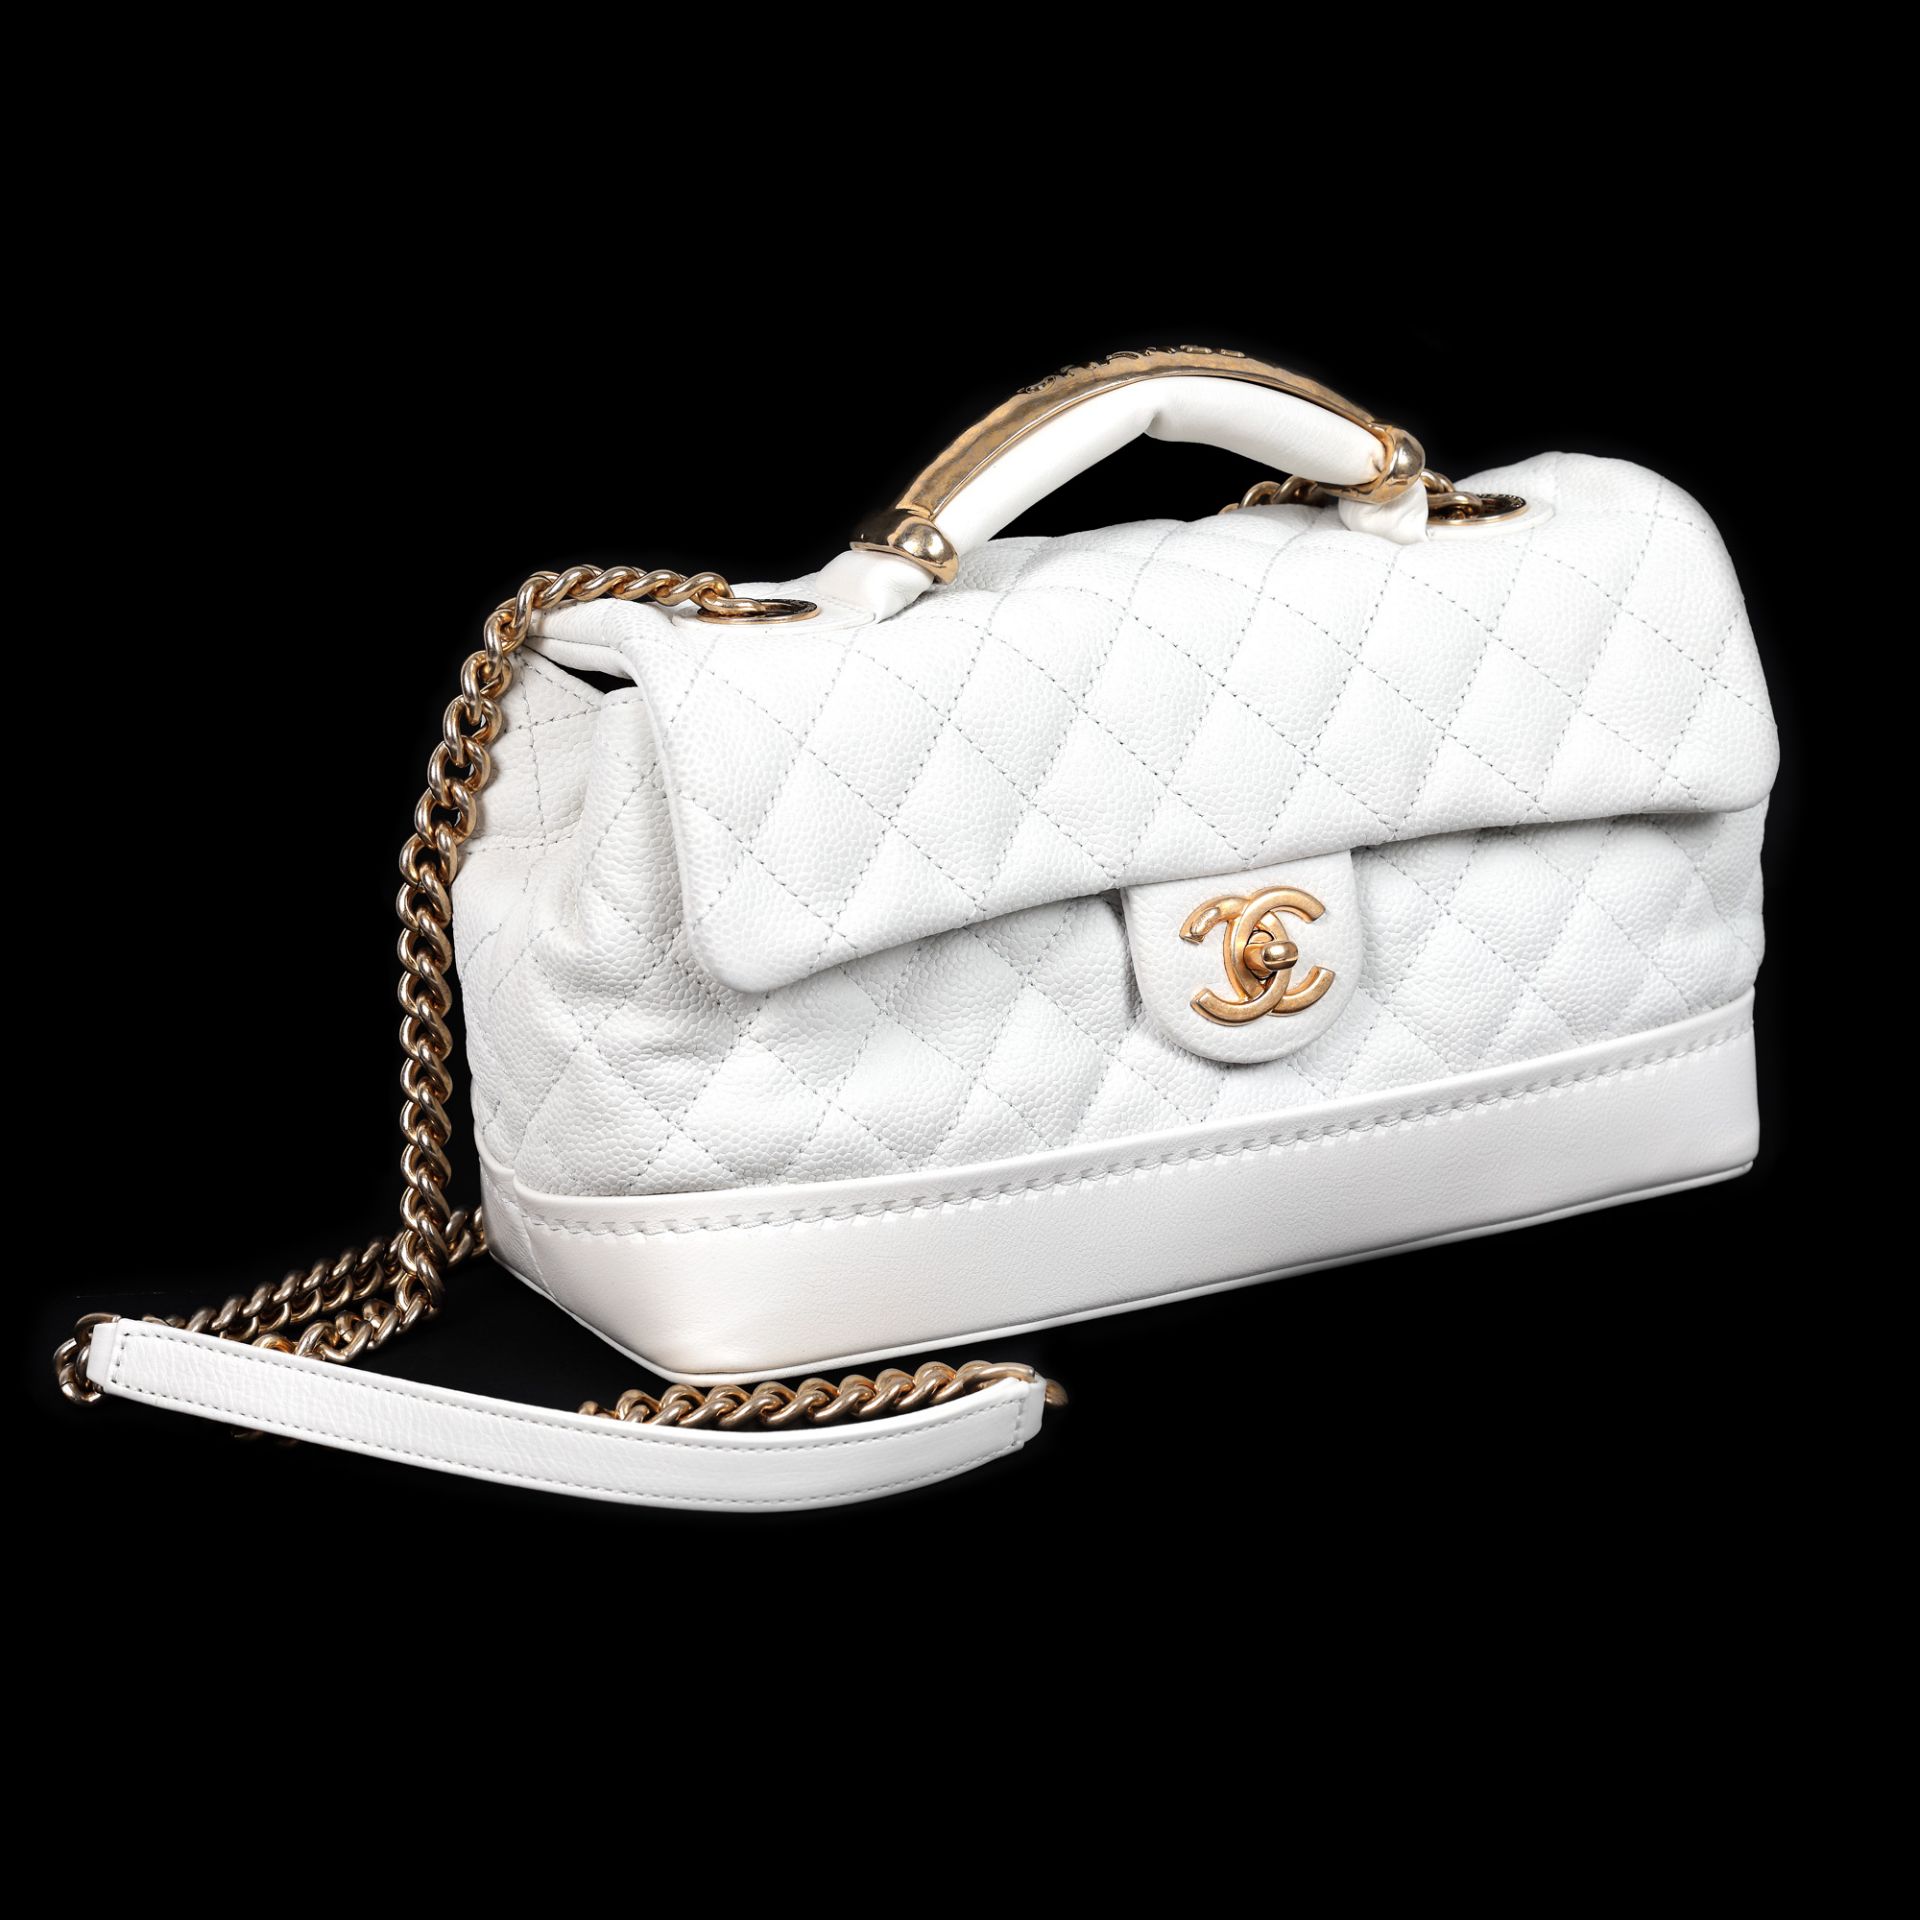 "Globe Trotter Flap" - Chanel bag, quilted leather, white - Image 5 of 6